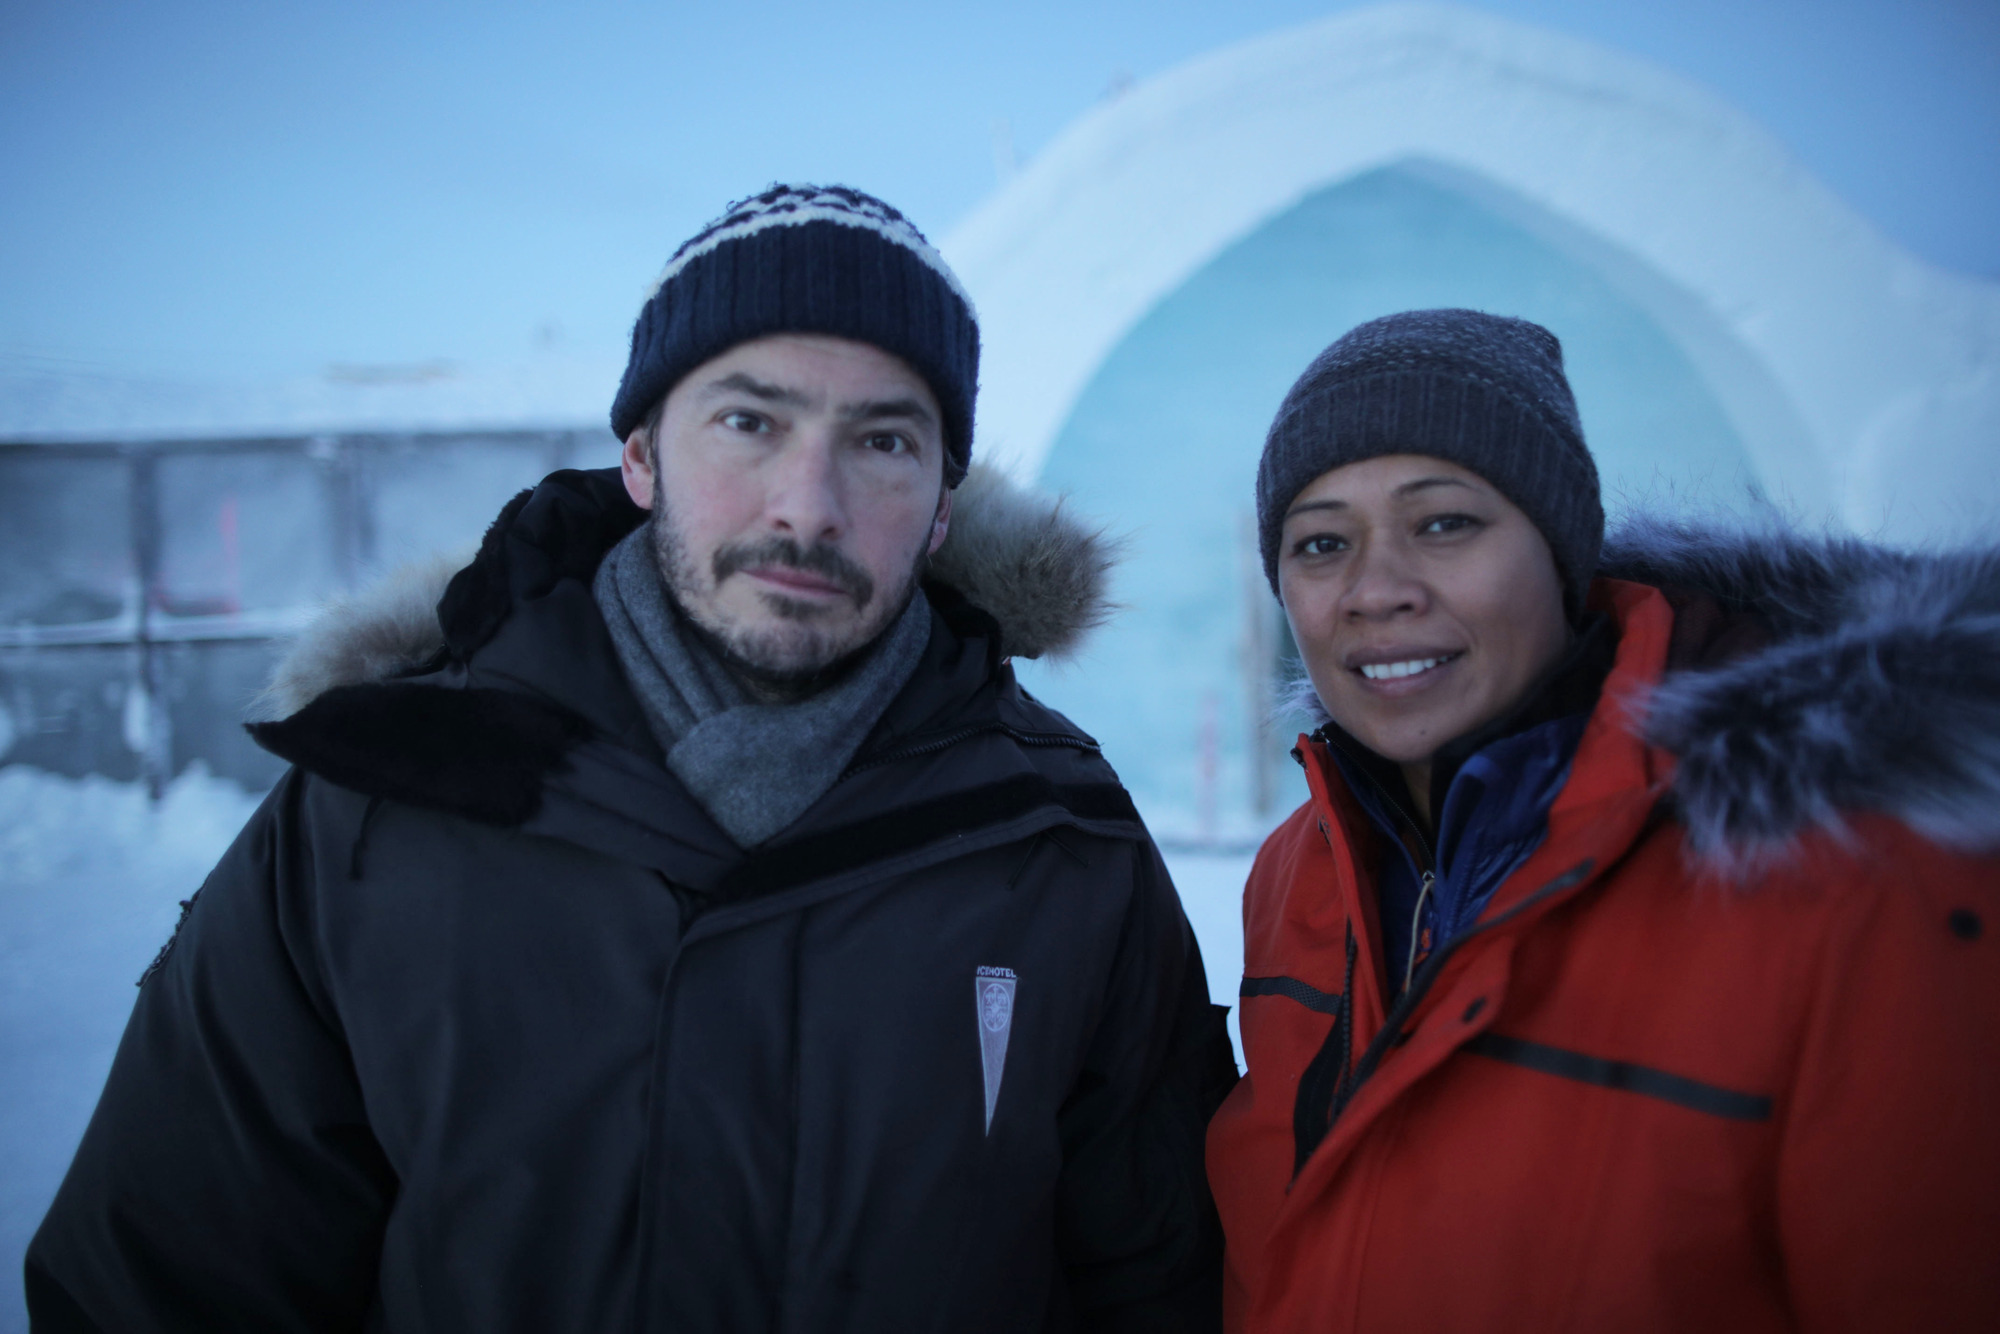 Looking for a different kind of break? Try the ICEHOTEL 365